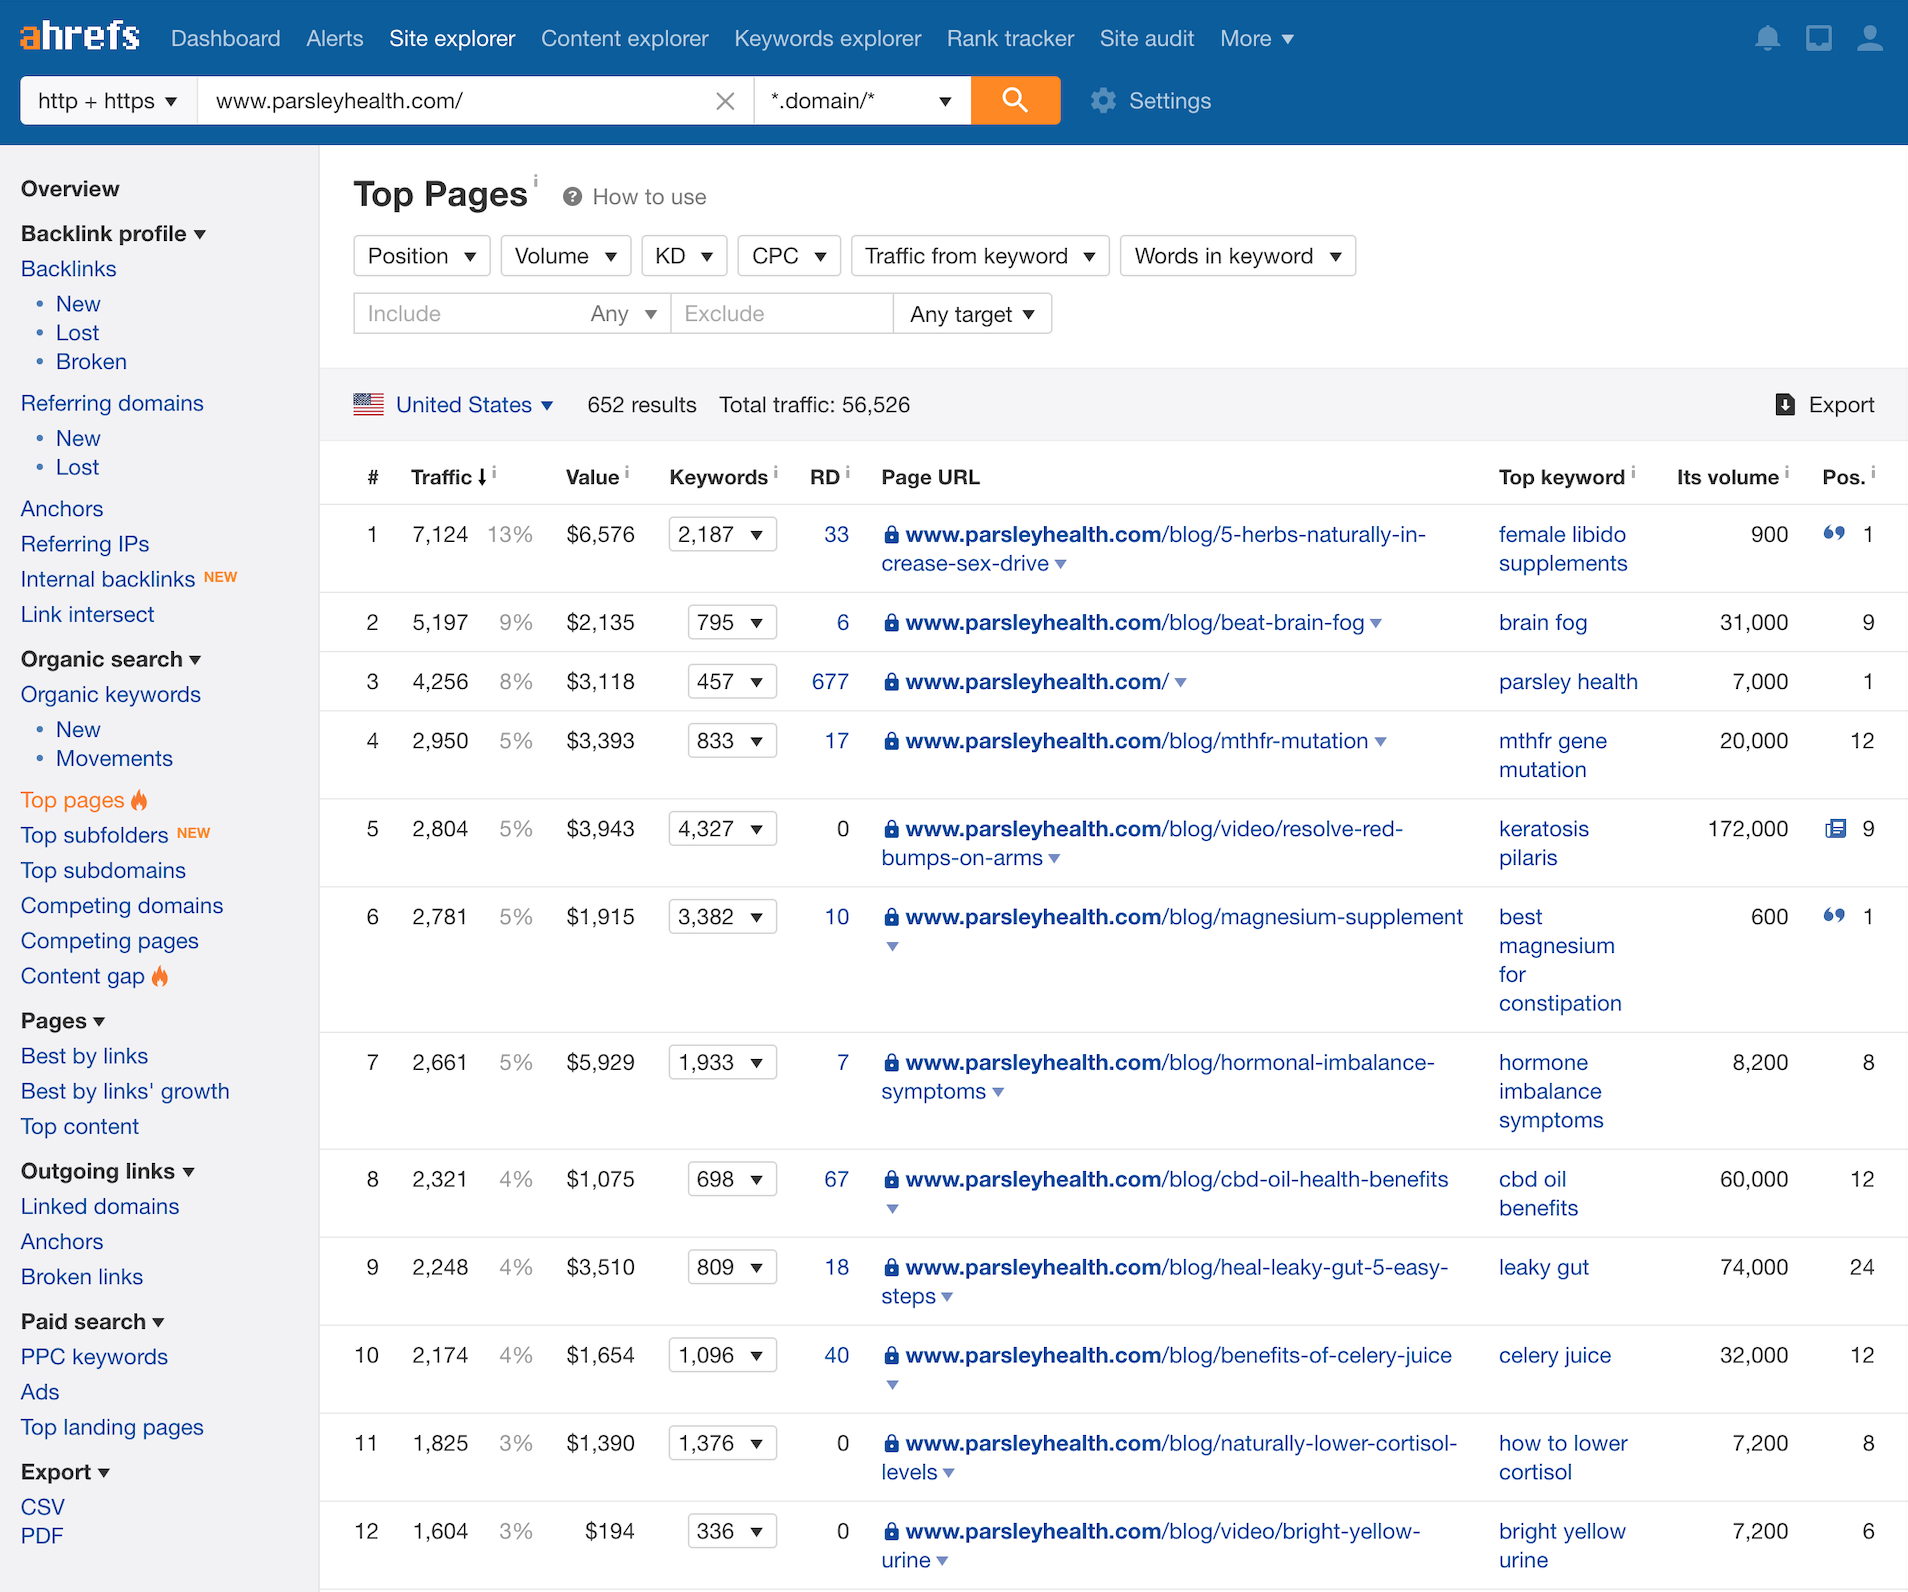 Top Pages - Site Explorer example in Ahrefs